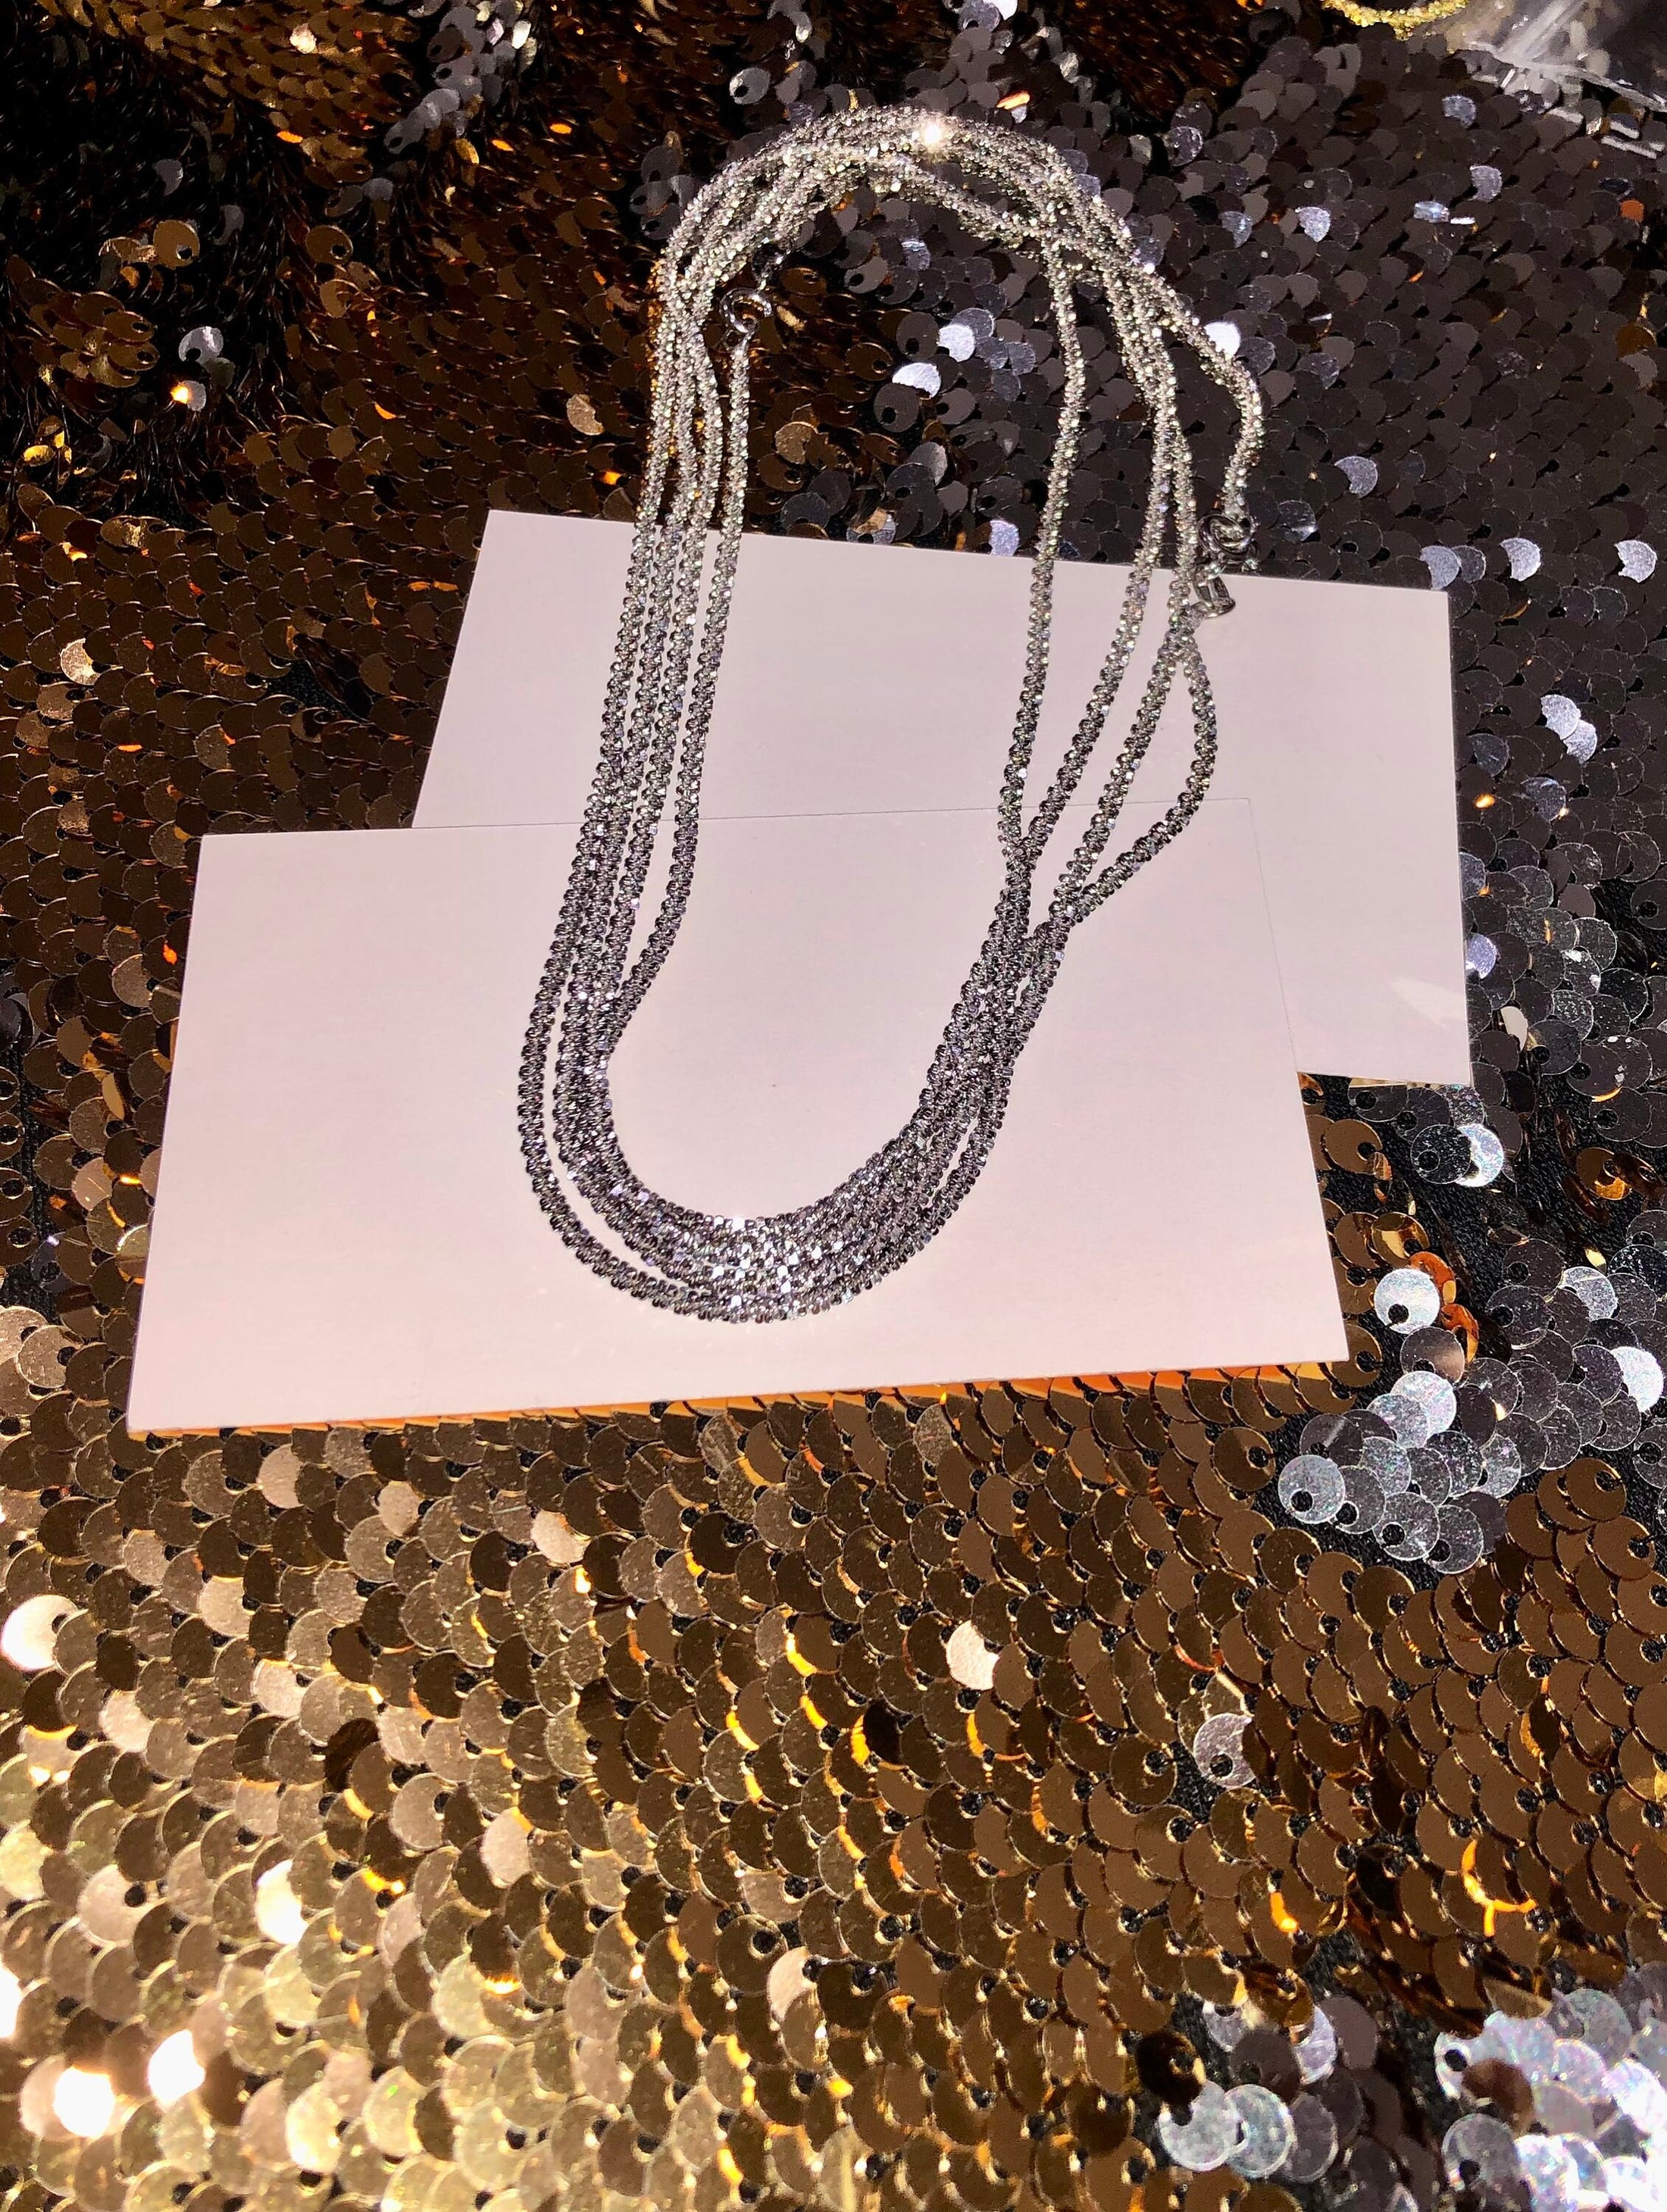 Sparkle Turkish ice chain bestseller back in stock best gift for women holiday anniversary birthday huge sale free gift w/ purchase HOT